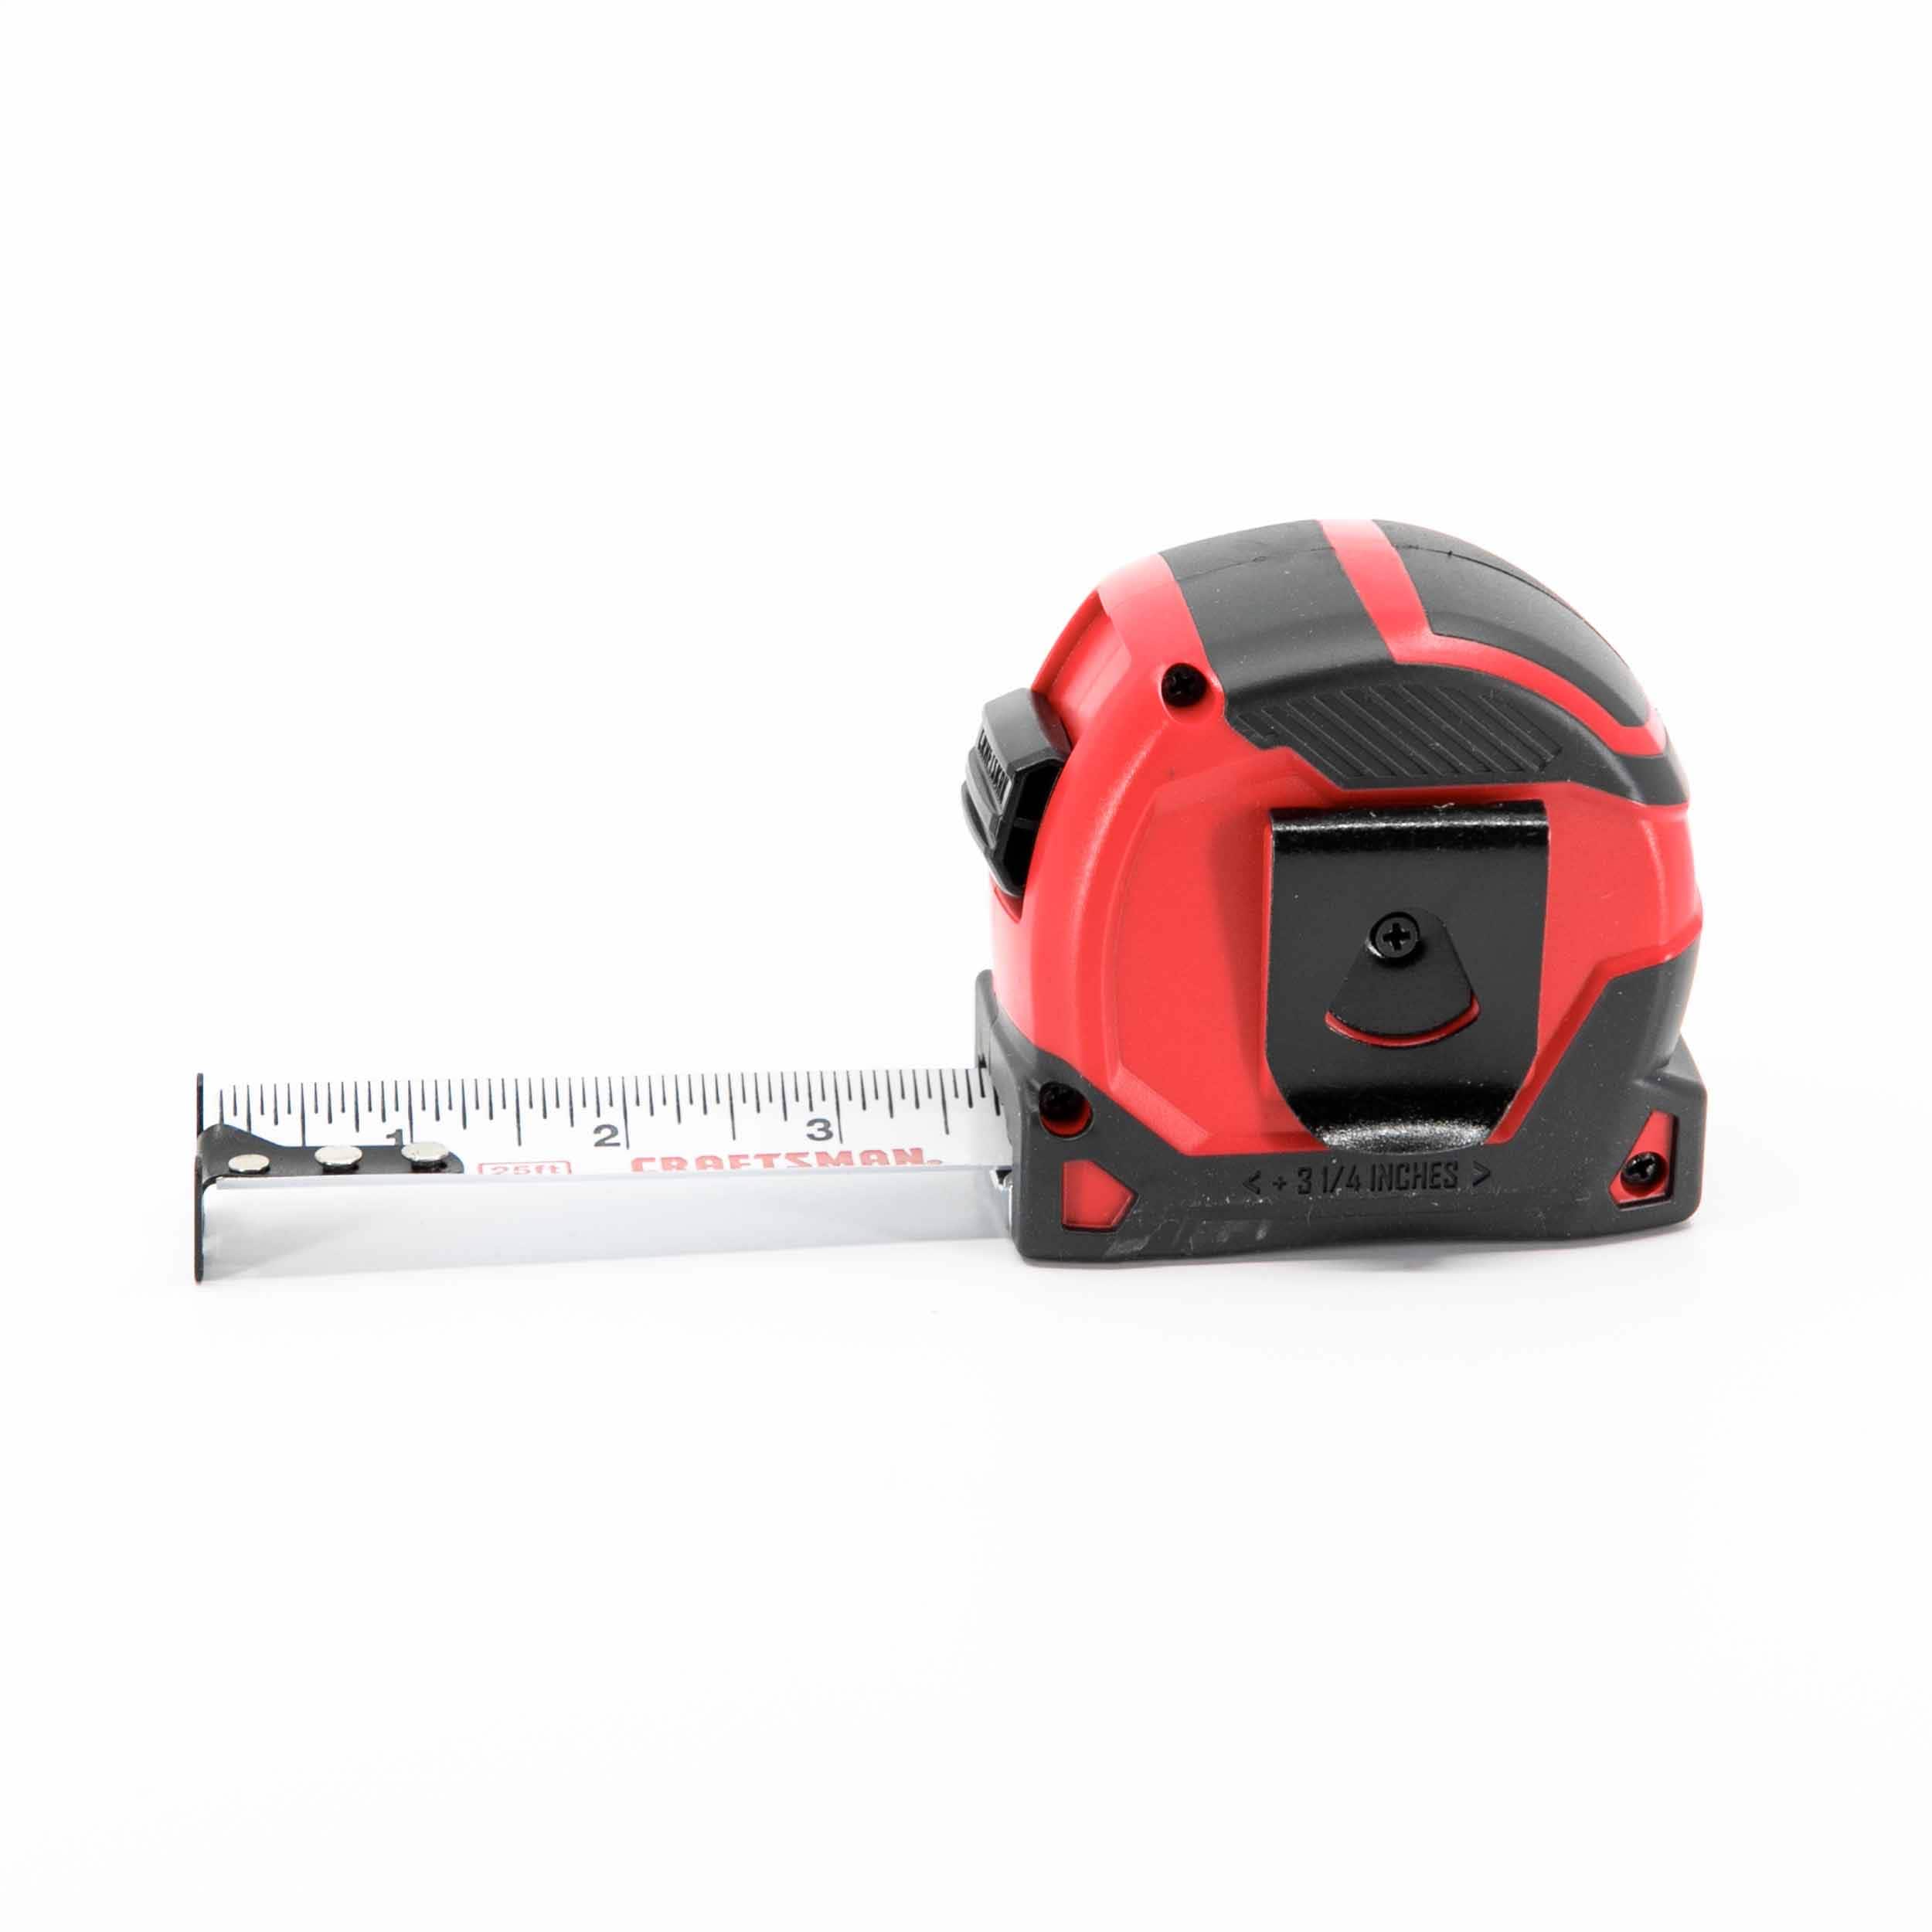 CRAFTSMAN KEYCHAIN 8-ft Tape Measure at